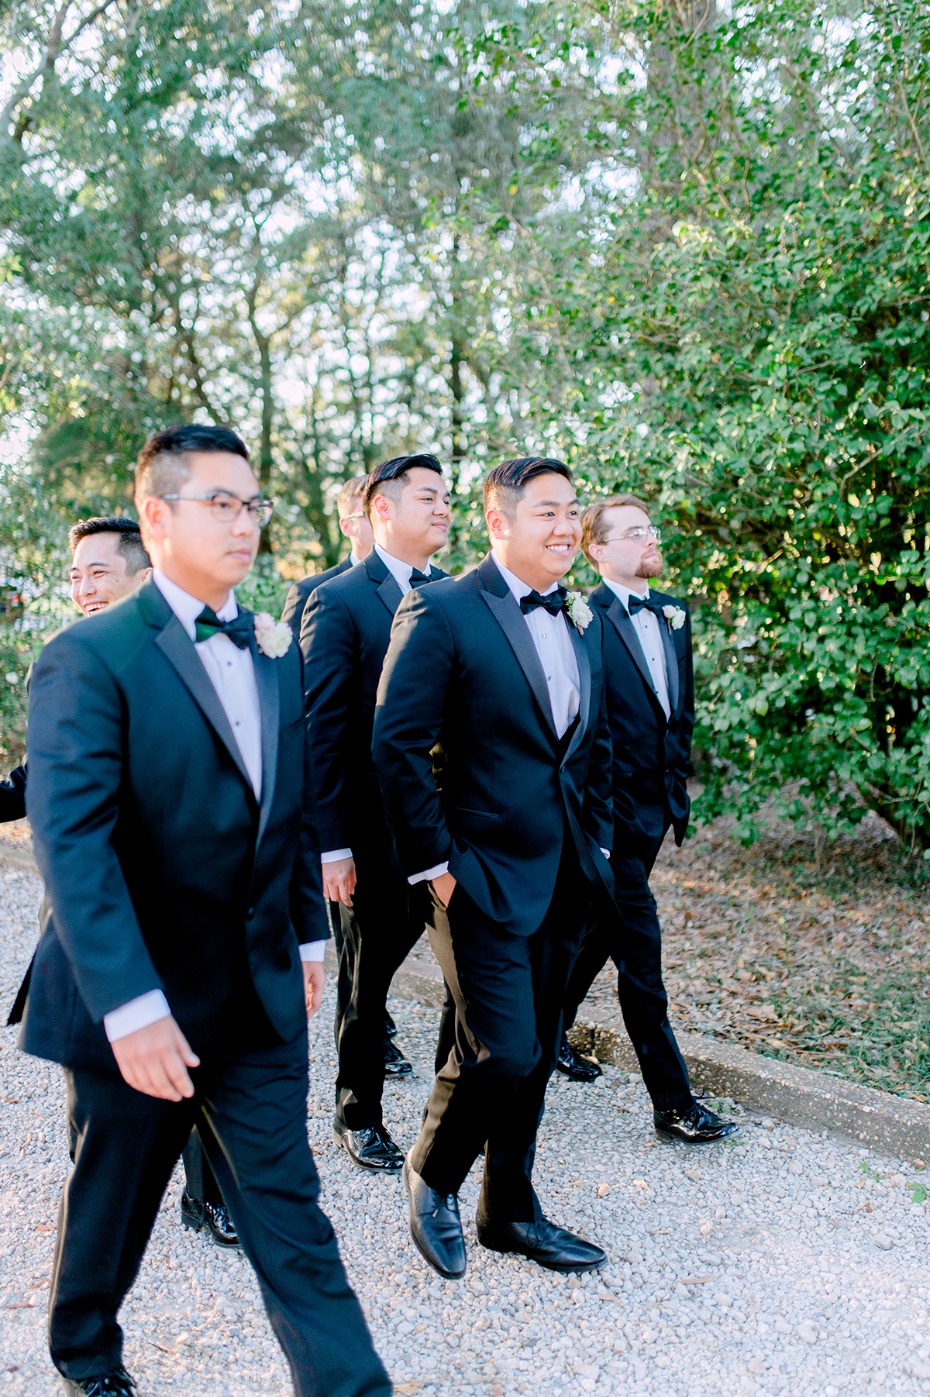 formal wedding style for the groom and his men